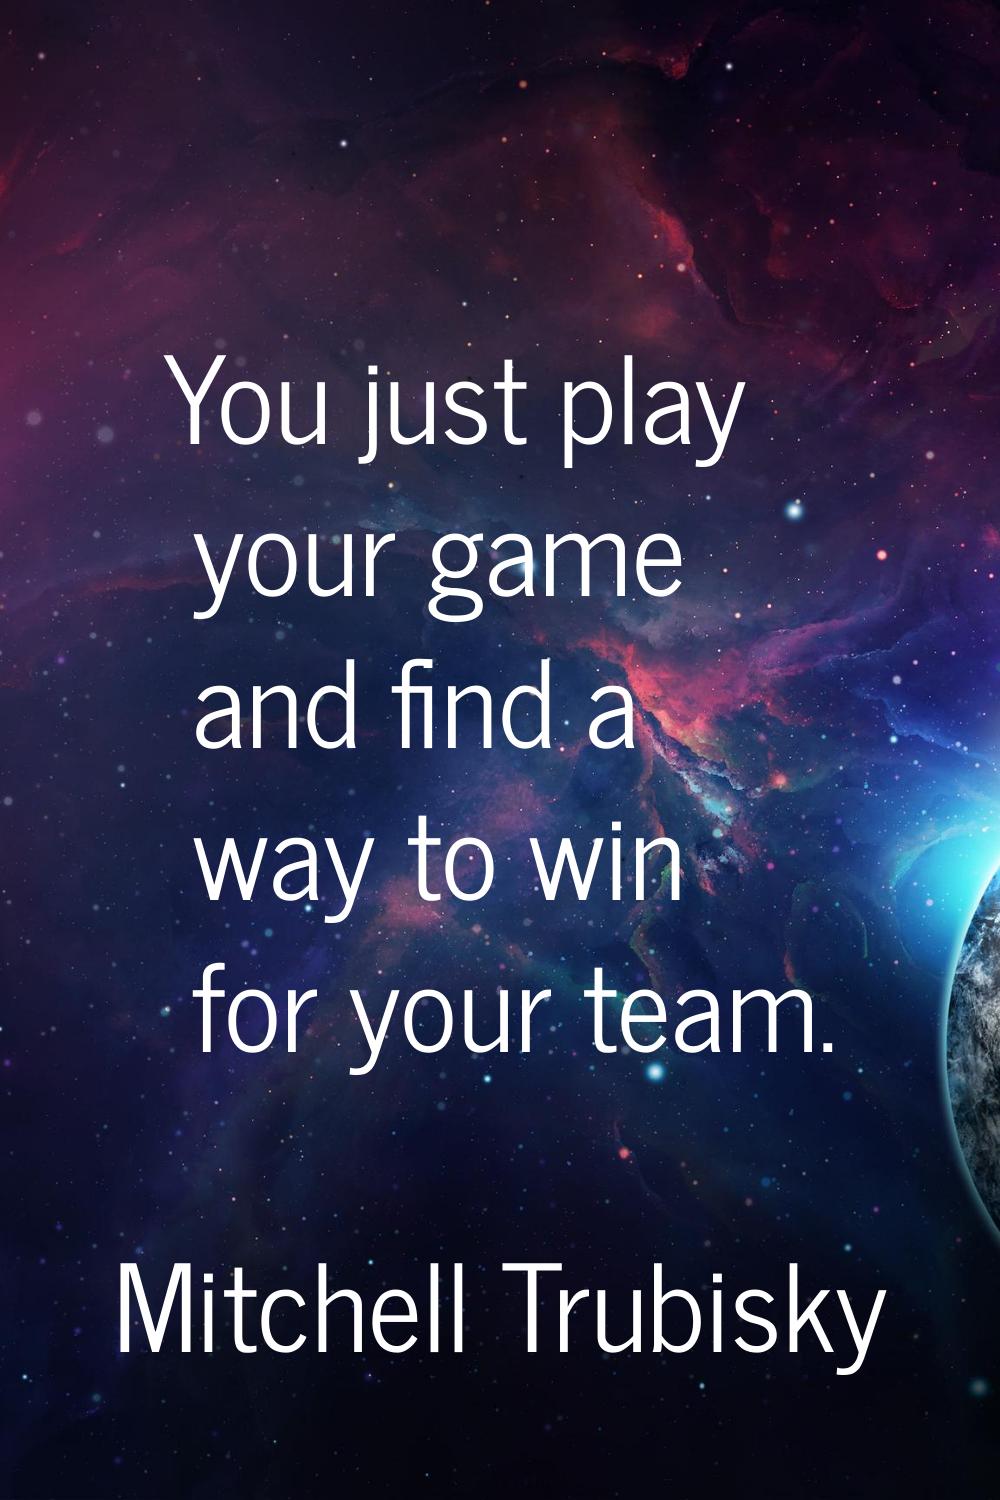 You just play your game and find a way to win for your team.